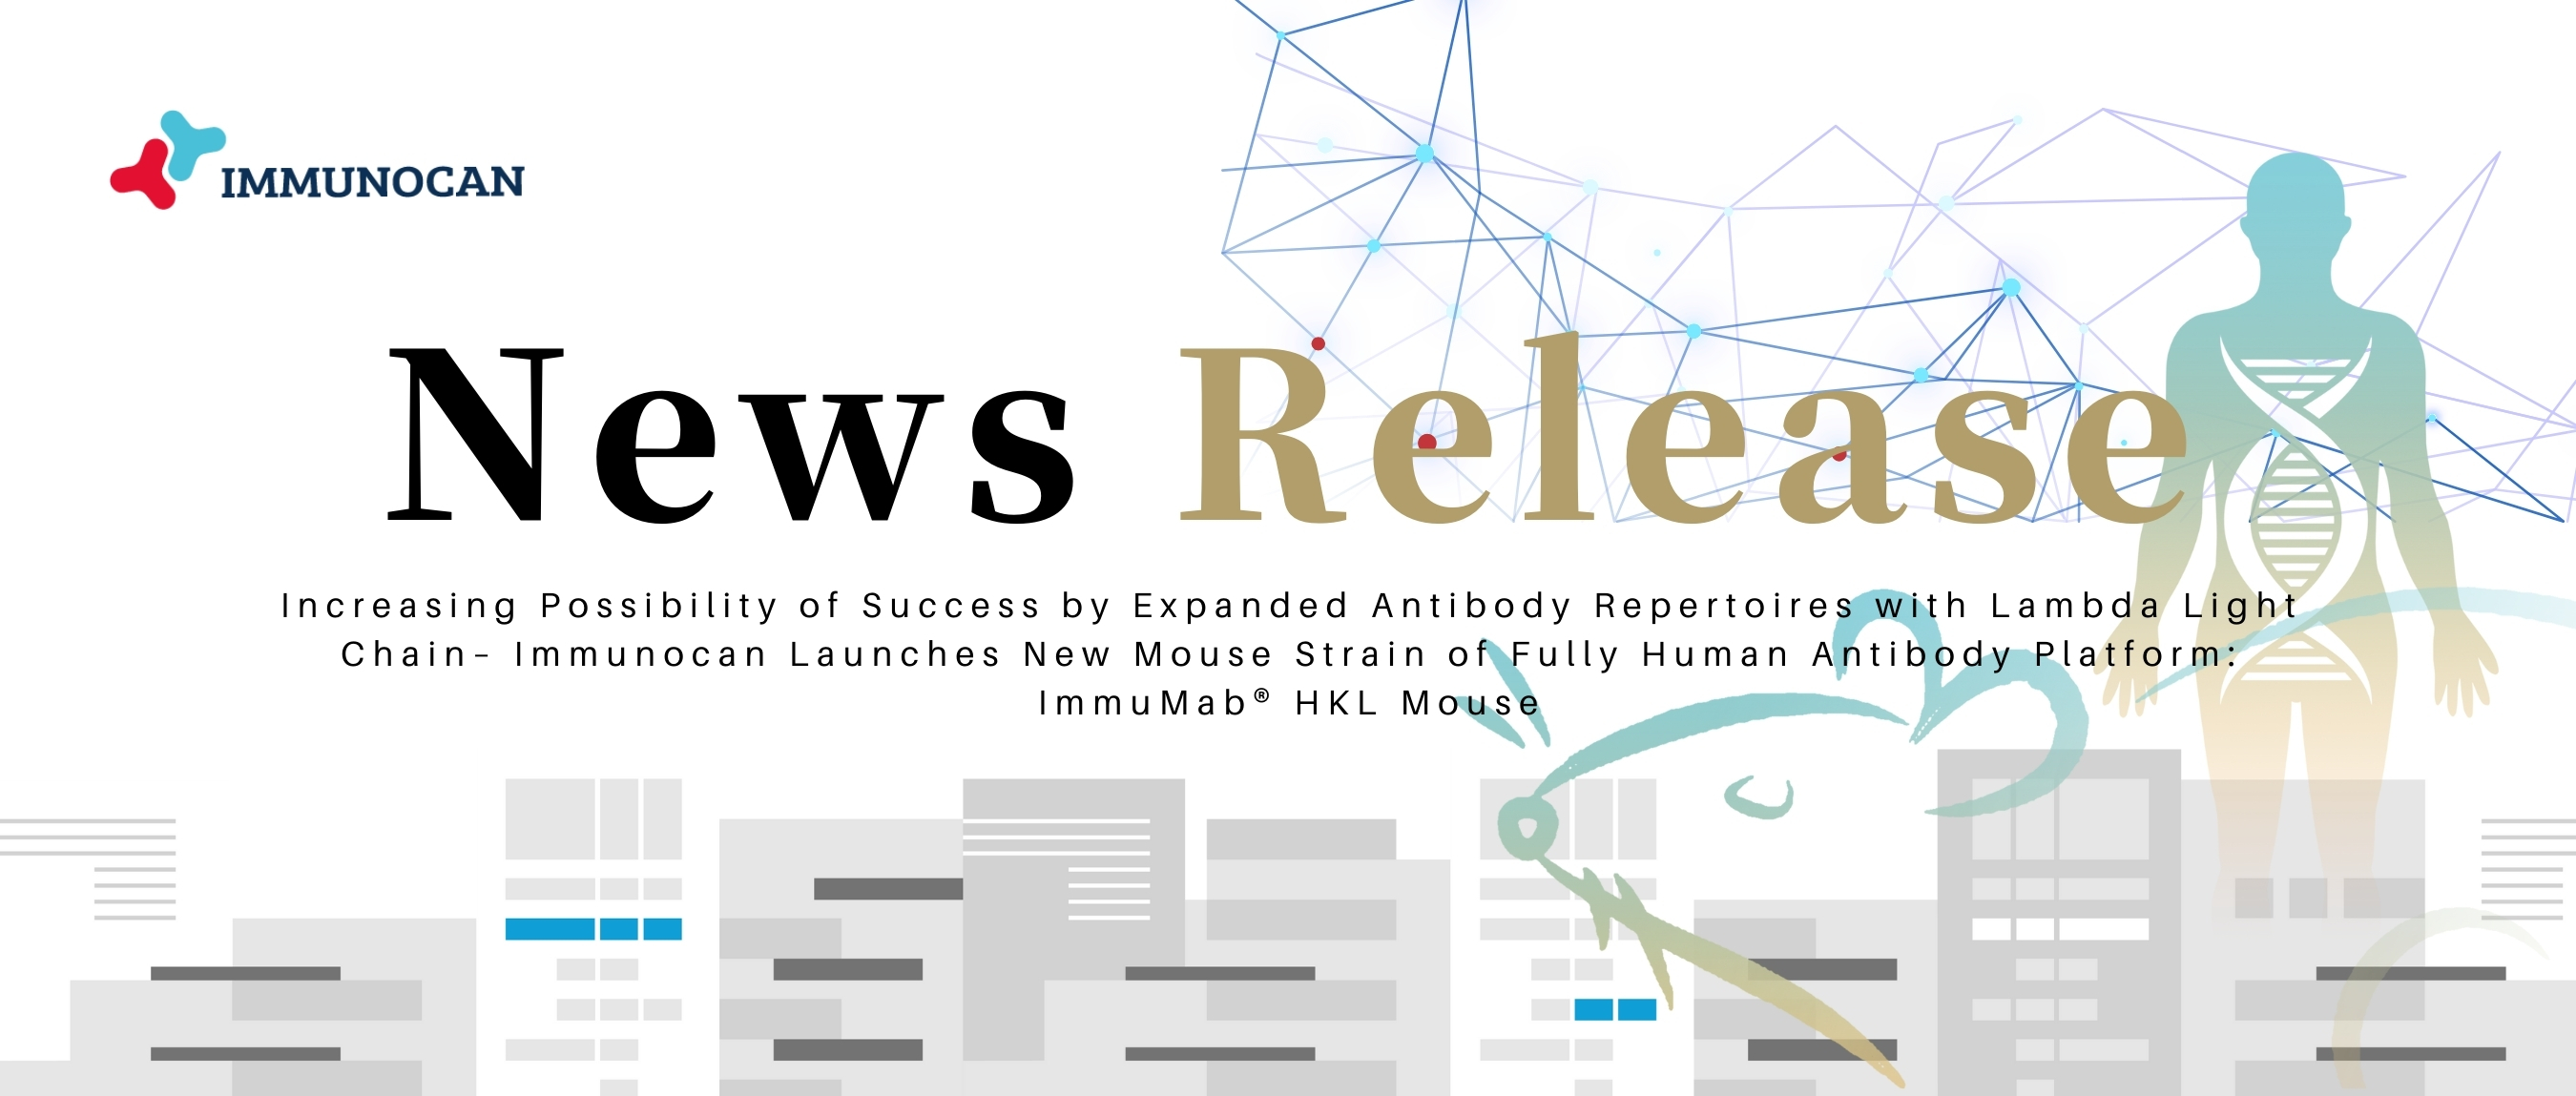 Increasing Possibility of Success by Expanded Antibody Repertoires with Lambda Light Chain – Immunocan Launches New Mouse Strain of Fully Human Antibody Platform: ImmuMab® HKL Mouse